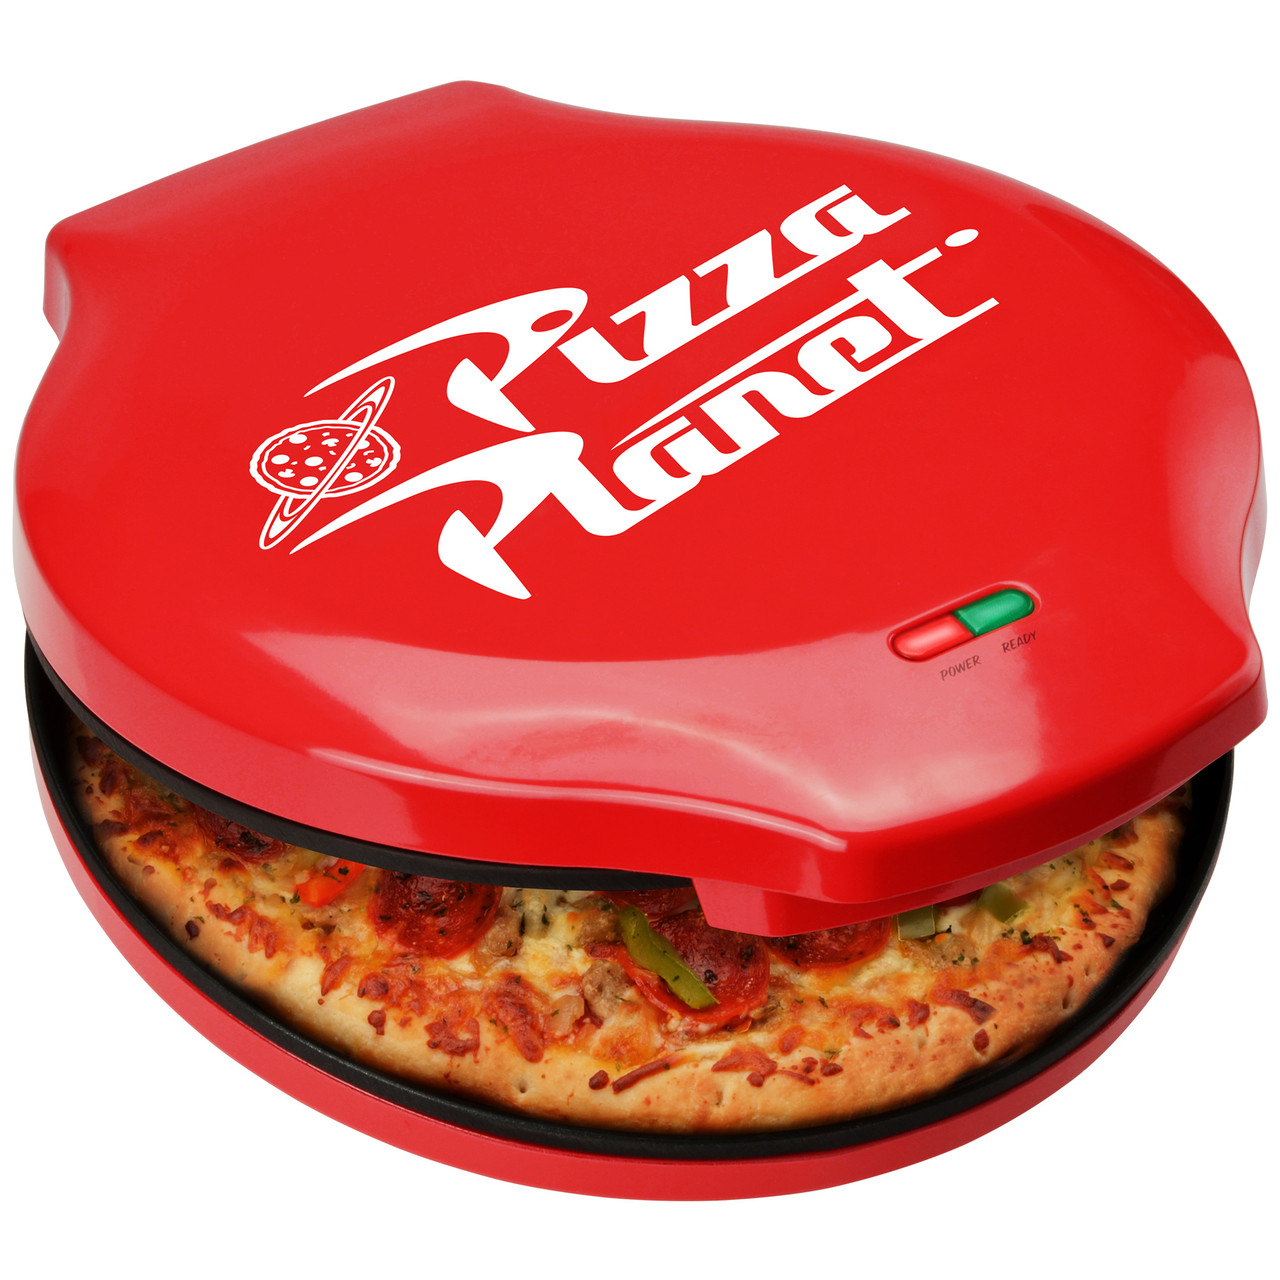 Pixar Toy Story Pizza Planet Electric Pizza Maker